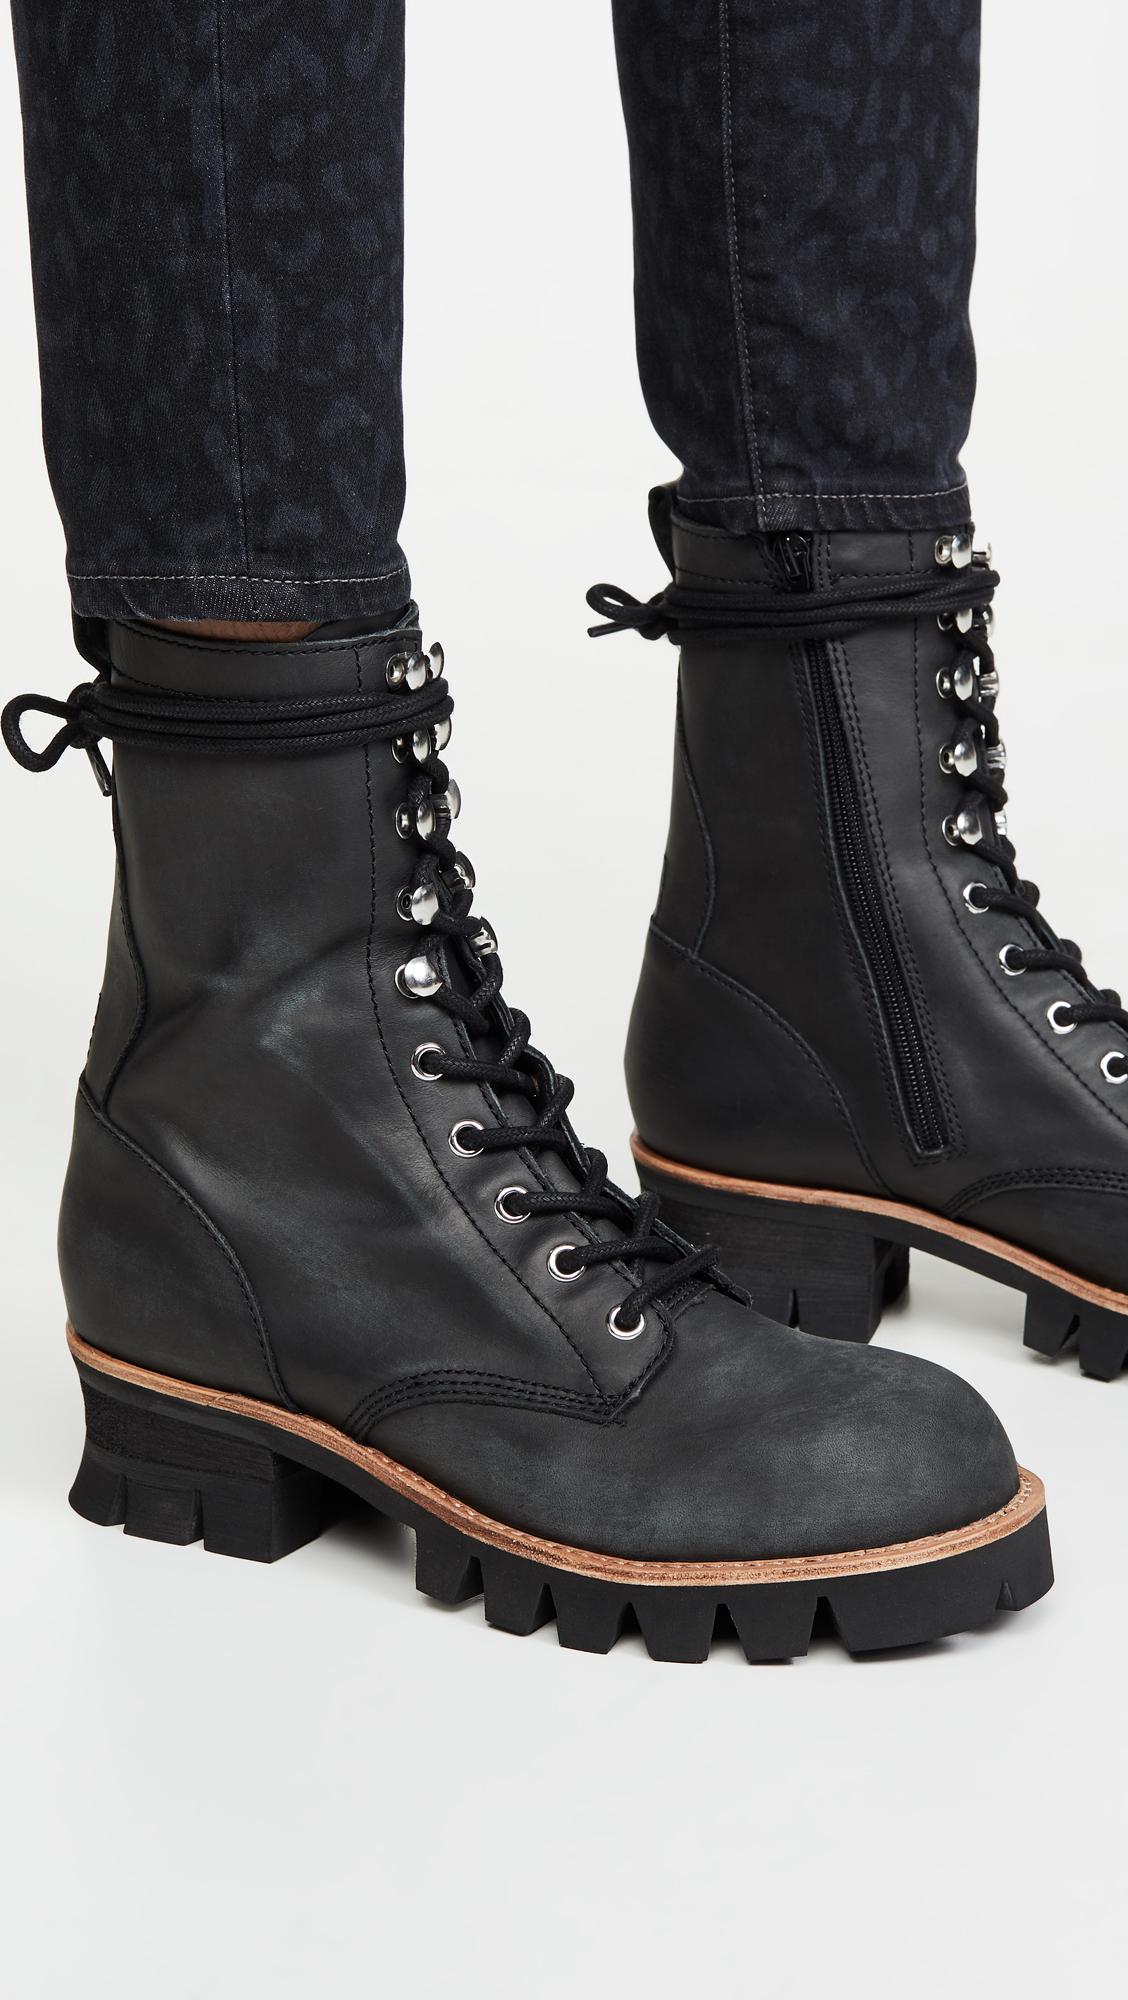 Jeffrey Campbell Suede Sycamore Combat Boots in Black Washed (Black) - Lyst